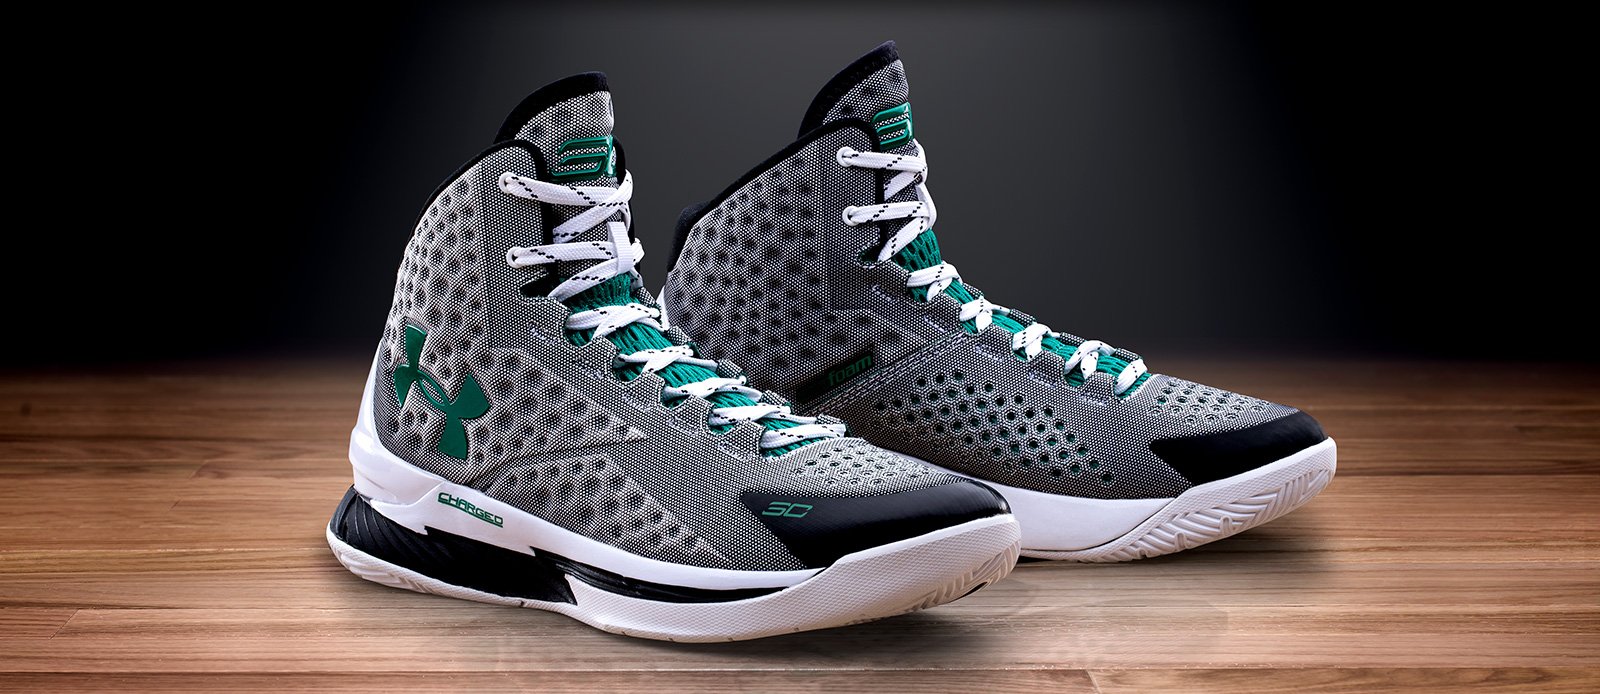 curry 1 shoes price